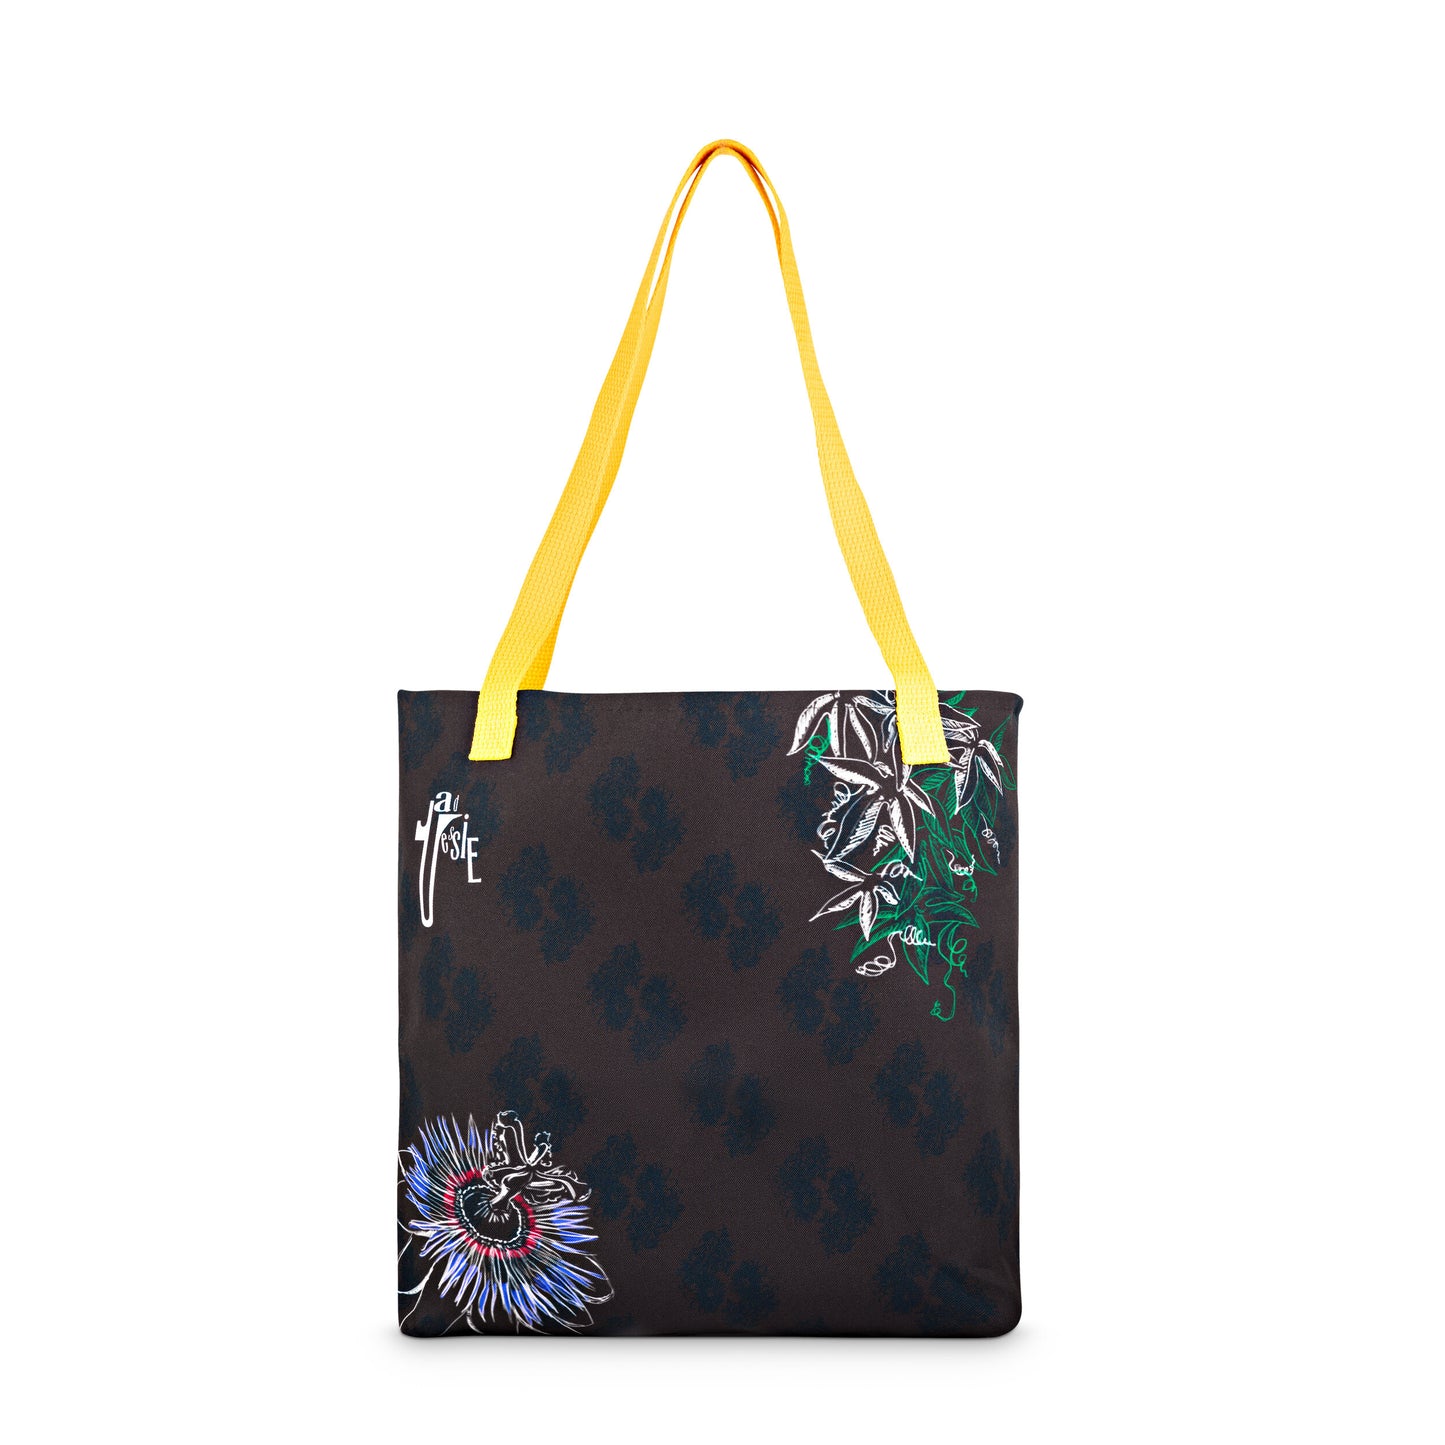 Chocolate Passion Bespoke Luxury Tote - Limited (only 25 available!)